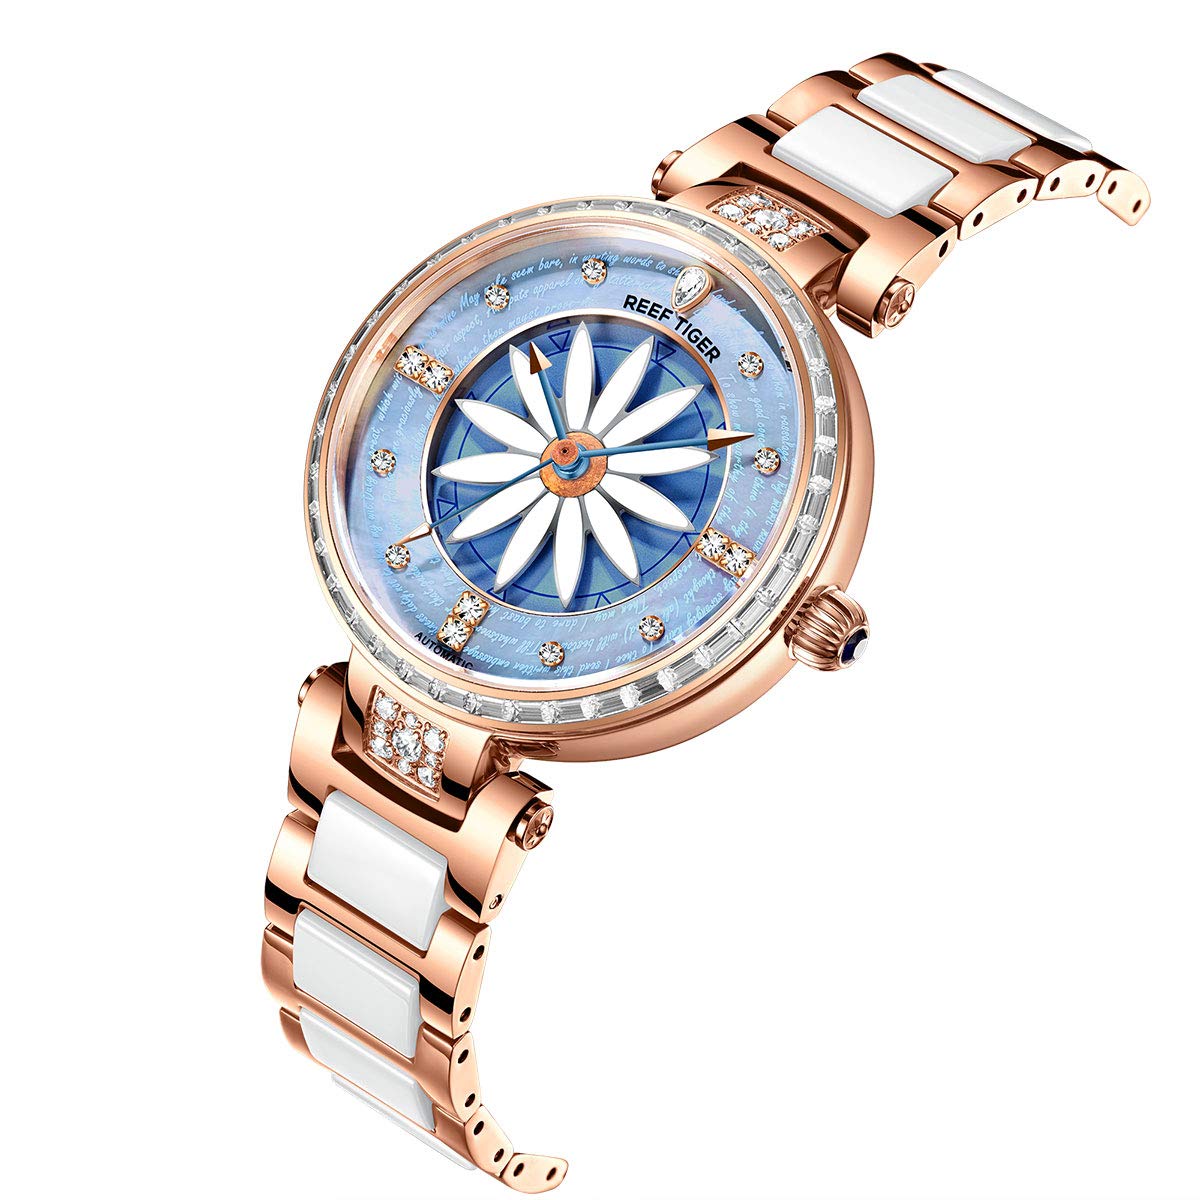 REEF TIGER Fashion Lily Ladies Automatic Watches for Women Diamonds Bezel RGA1599